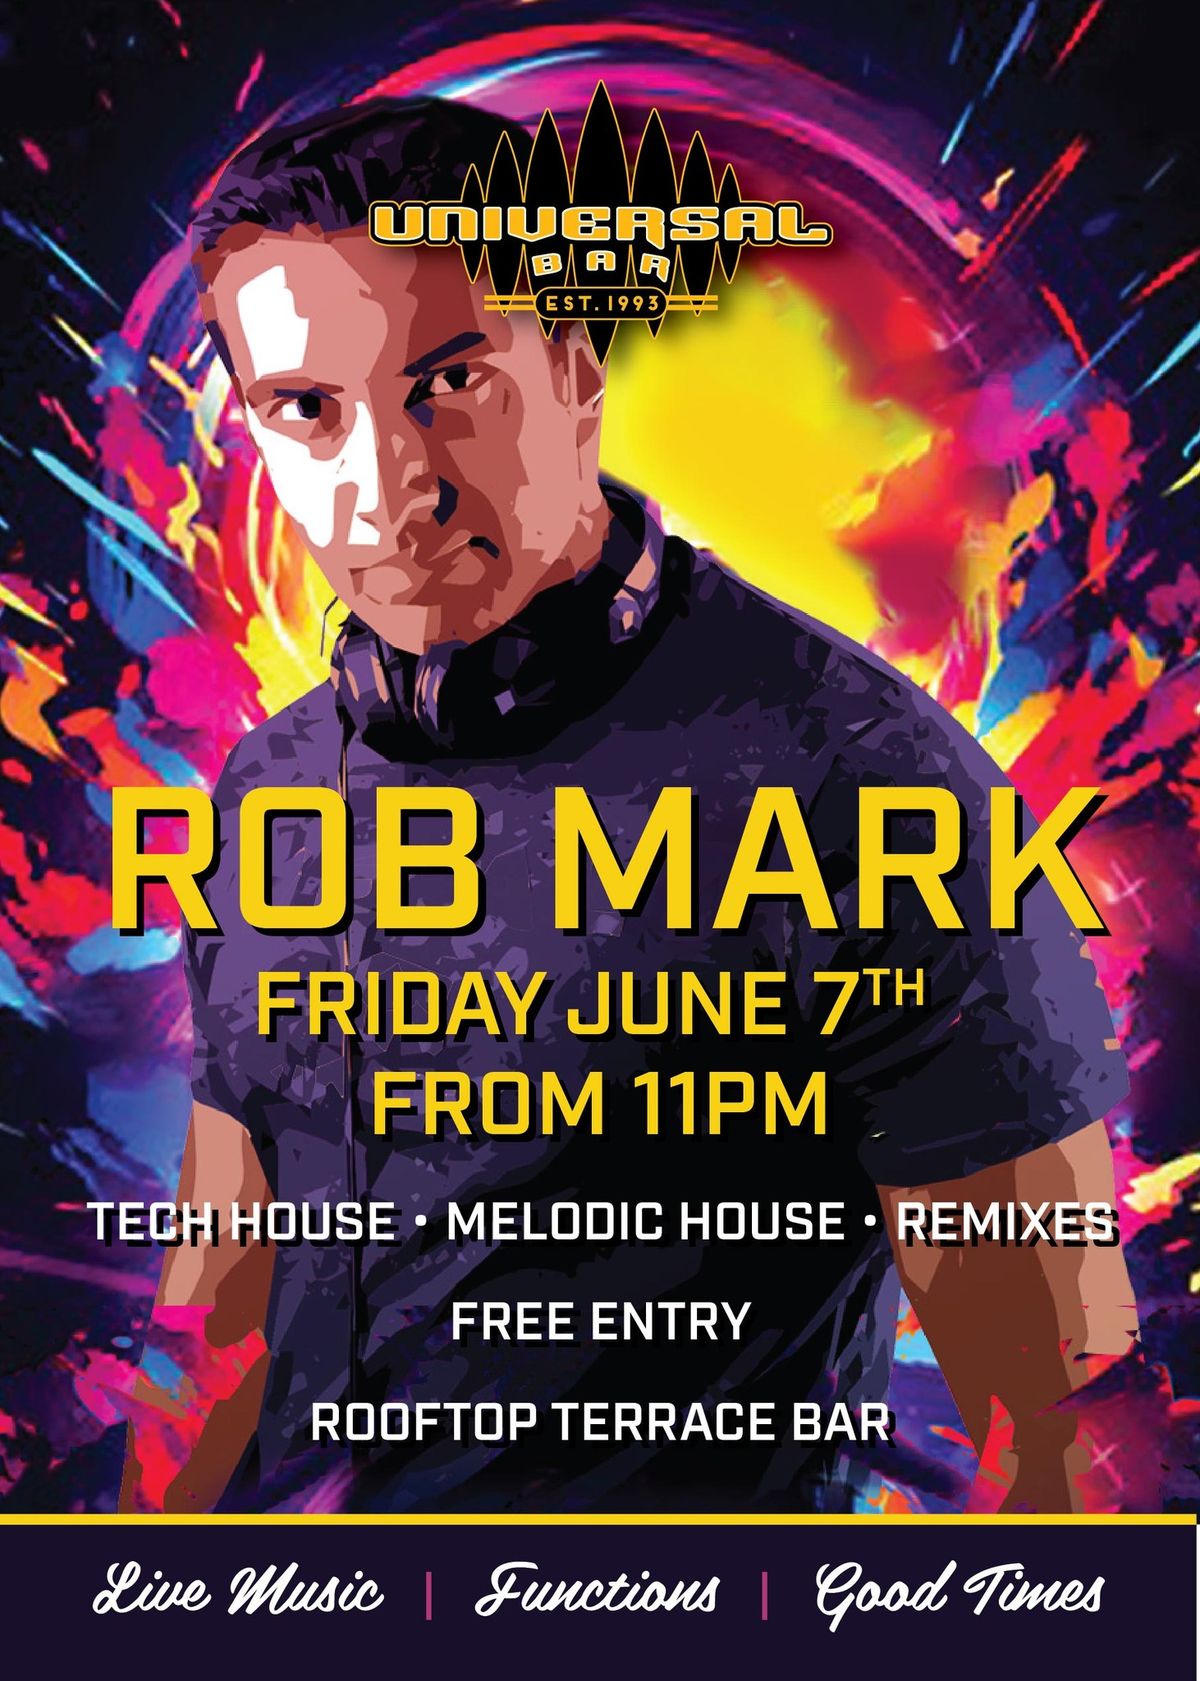 DJ Rob Mark in the Rooftop Terrace Bar